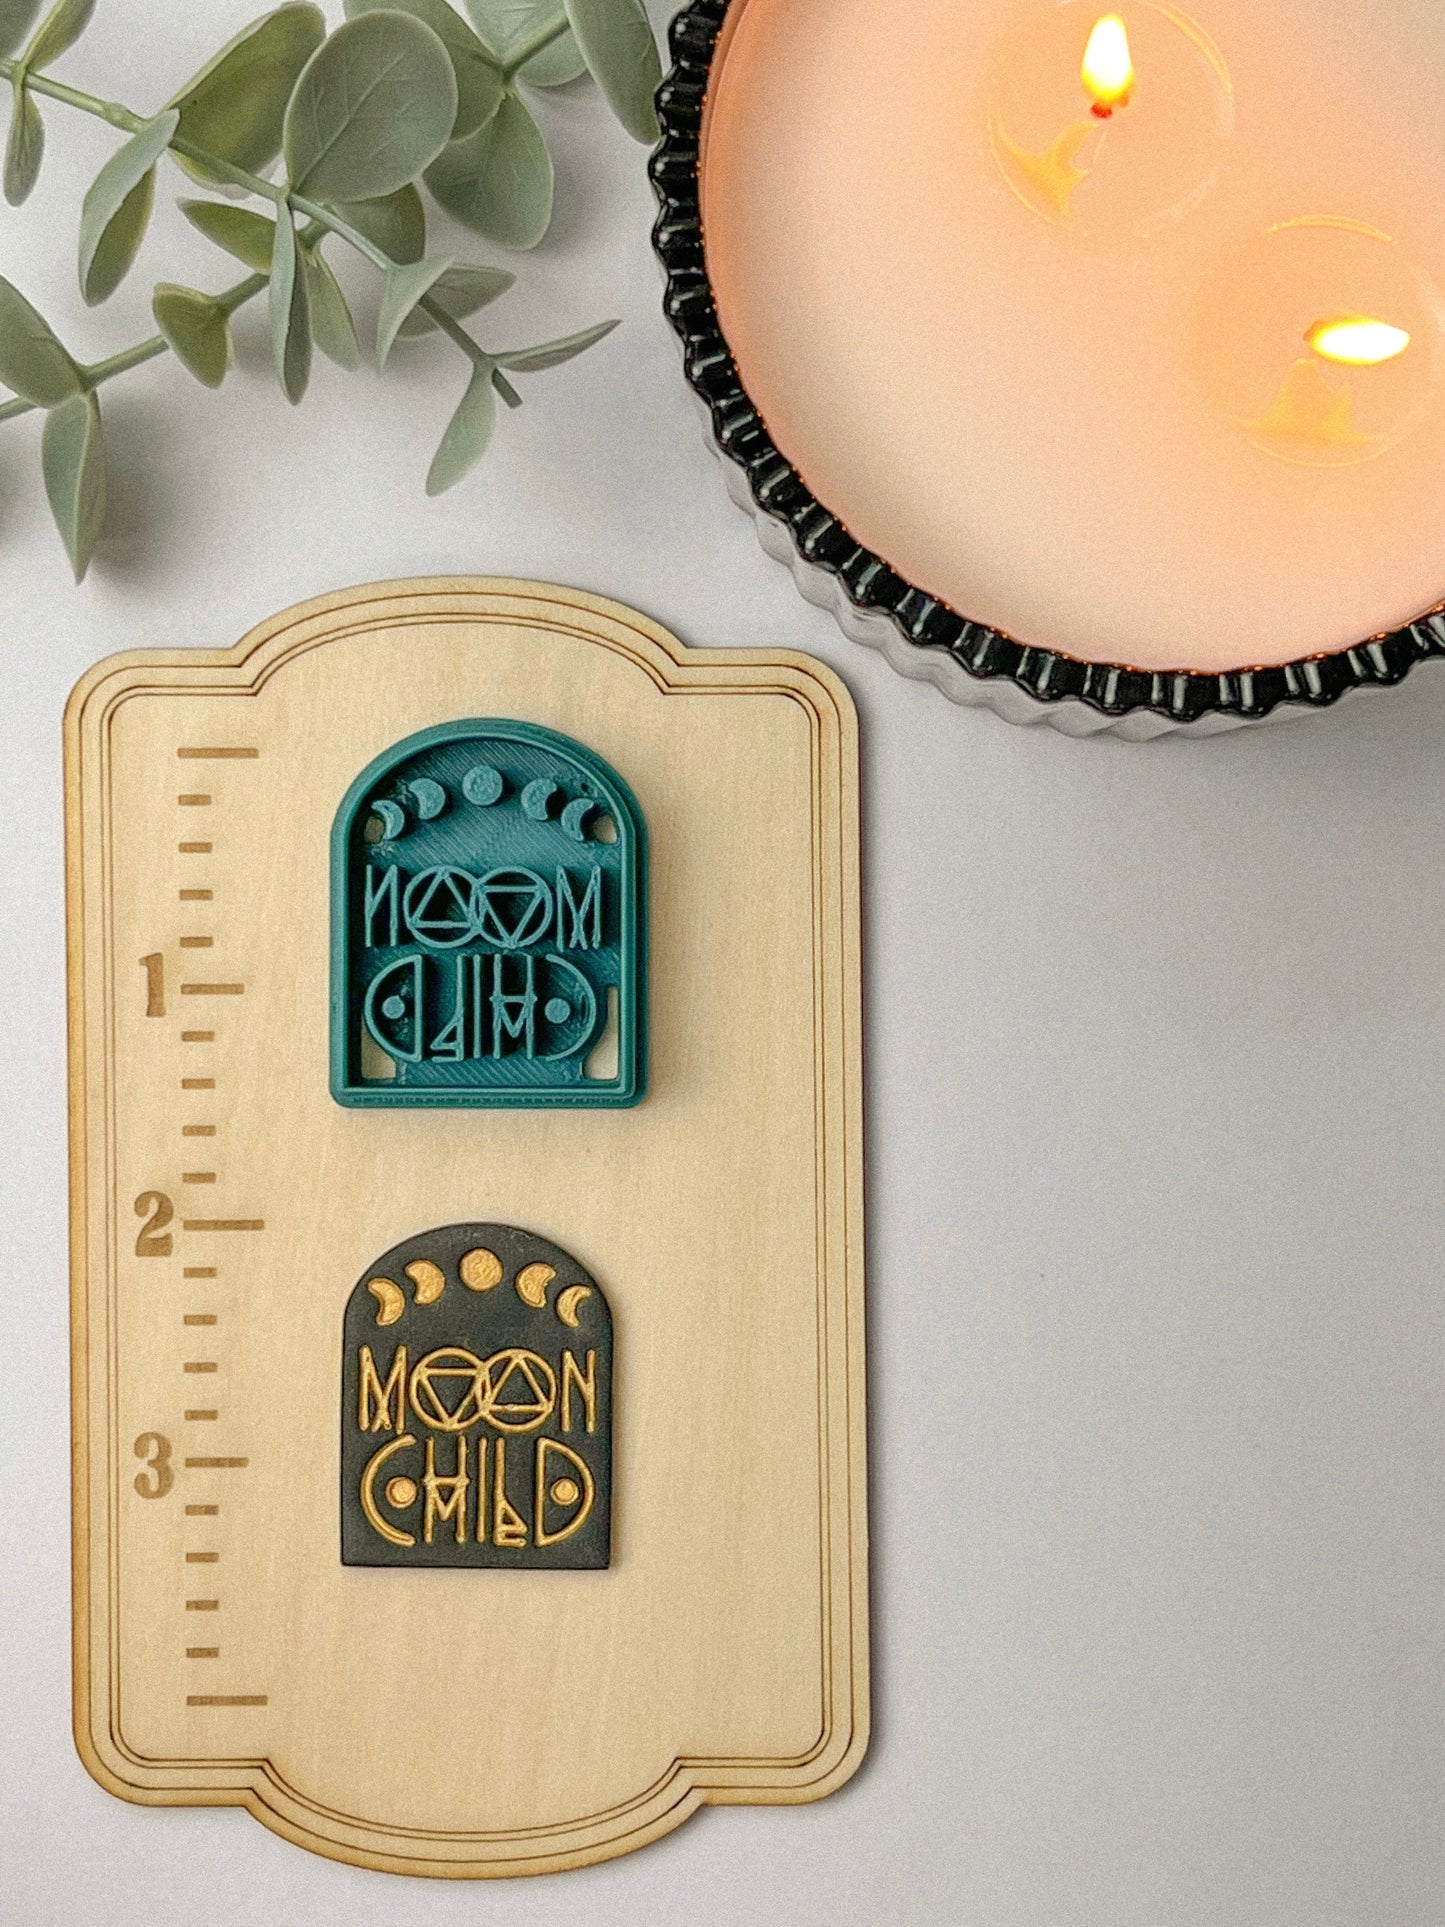 Moon Child Clay Cutter